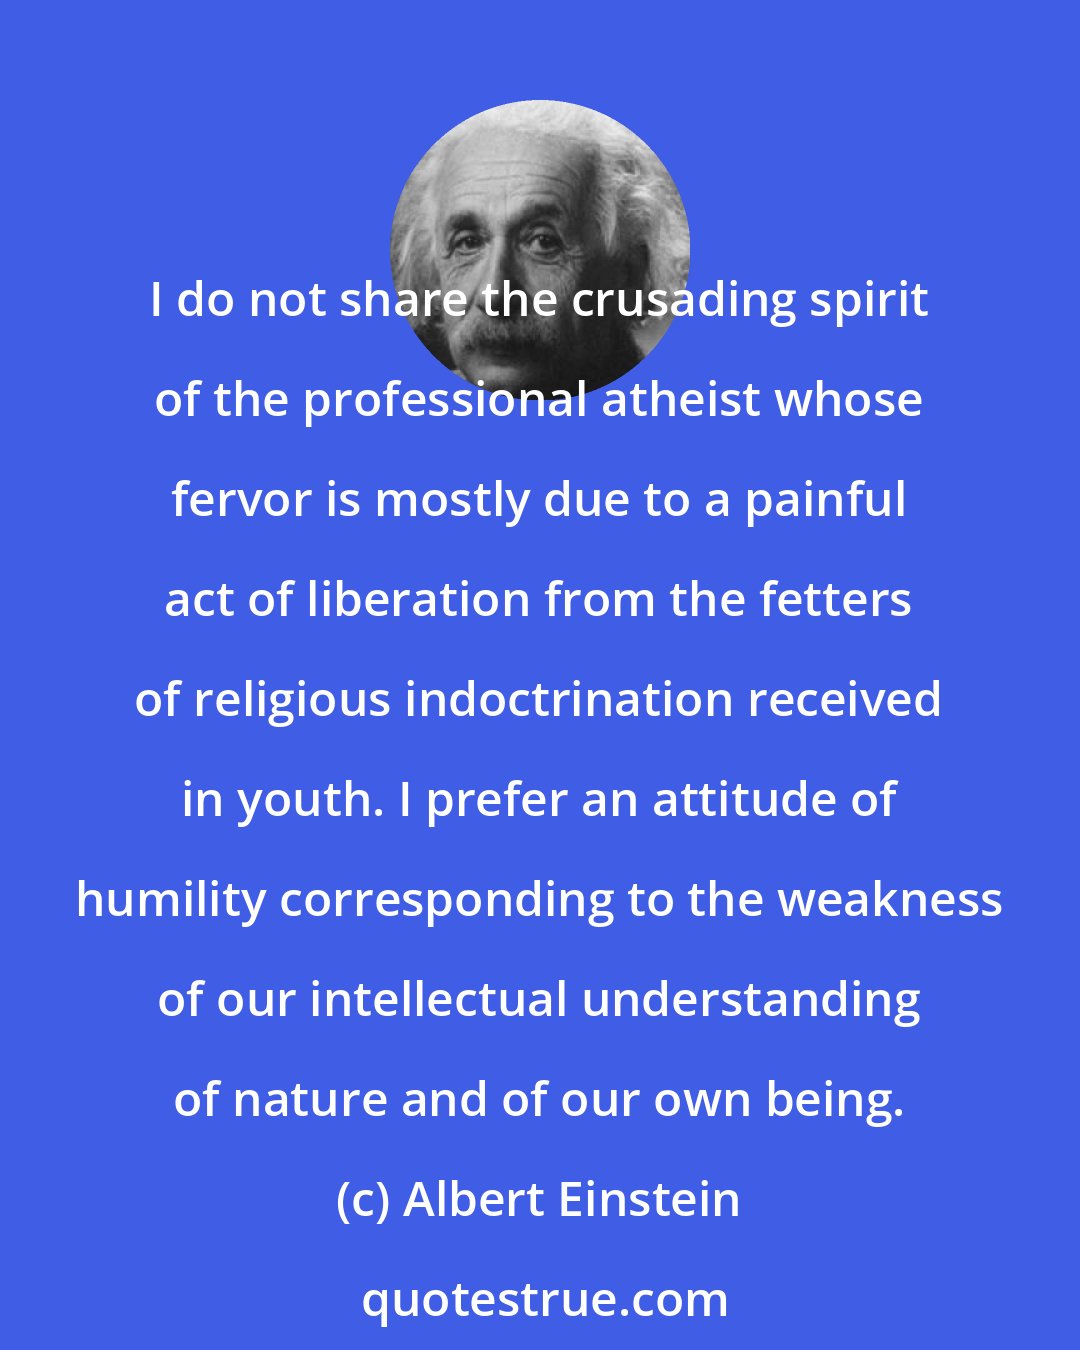 Albert Einstein: I do not share the crusading spirit of the professional atheist whose fervor is mostly due to a painful act of liberation from the fetters of religious indoctrination received in youth. I prefer an attitude of humility corresponding to the weakness of our intellectual understanding of nature and of our own being.